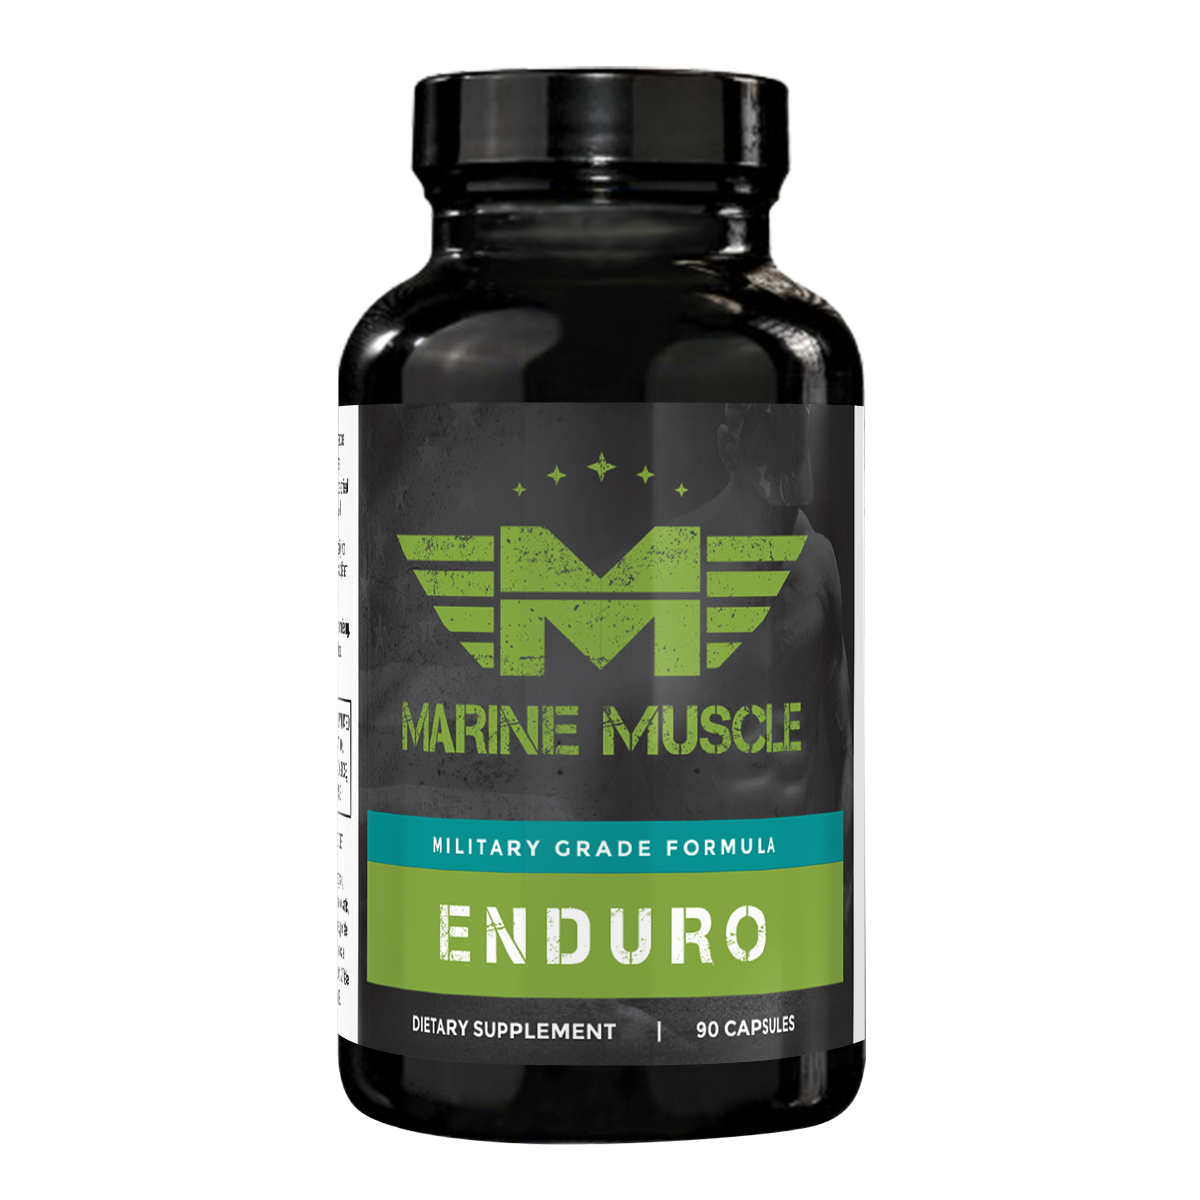 Marine Muscle Enduro Review